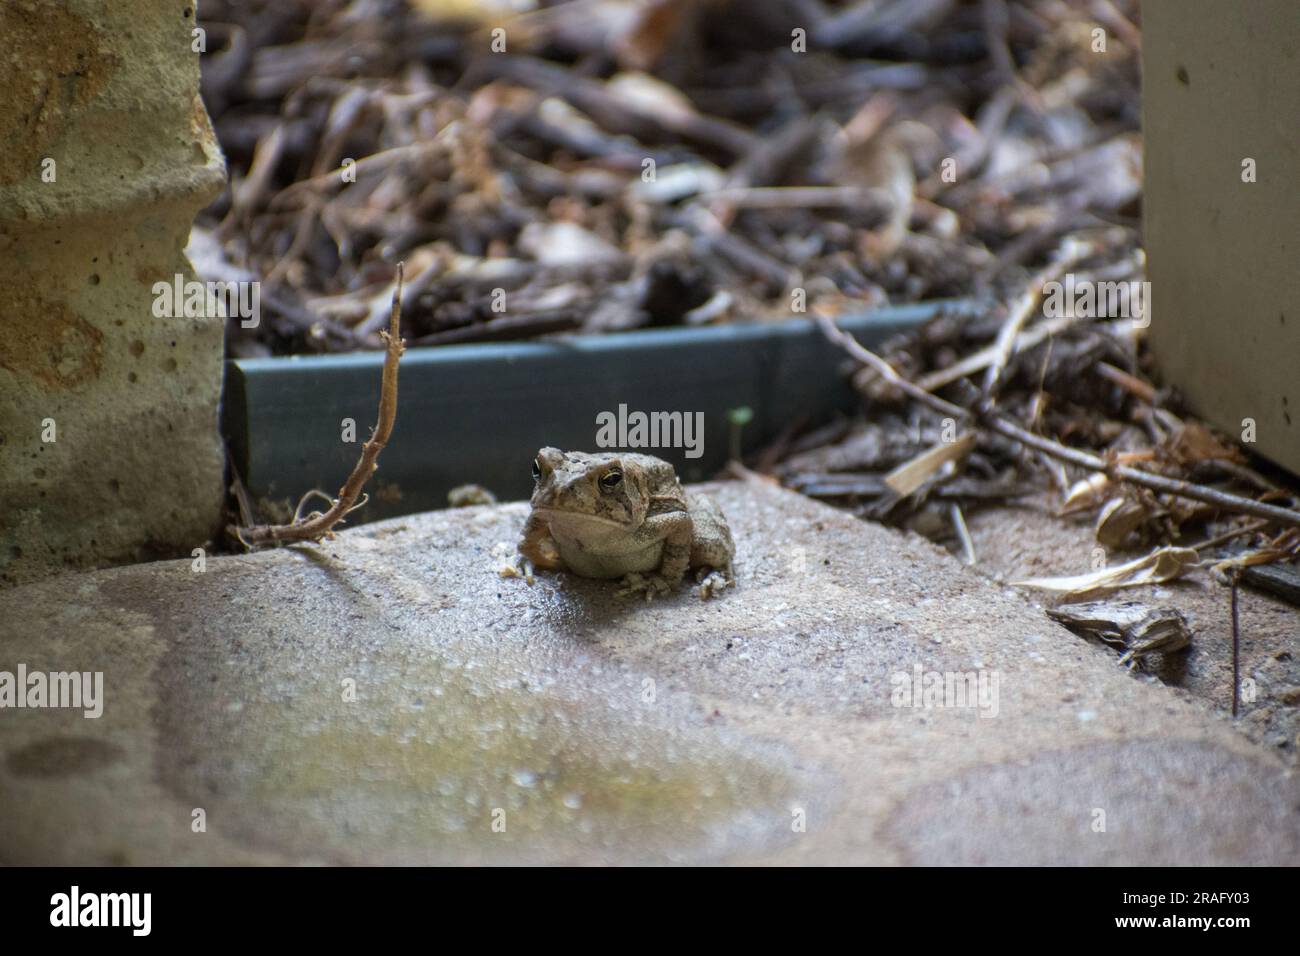 A small frog in the backyard, sitting on a stone patio. Stock Photo